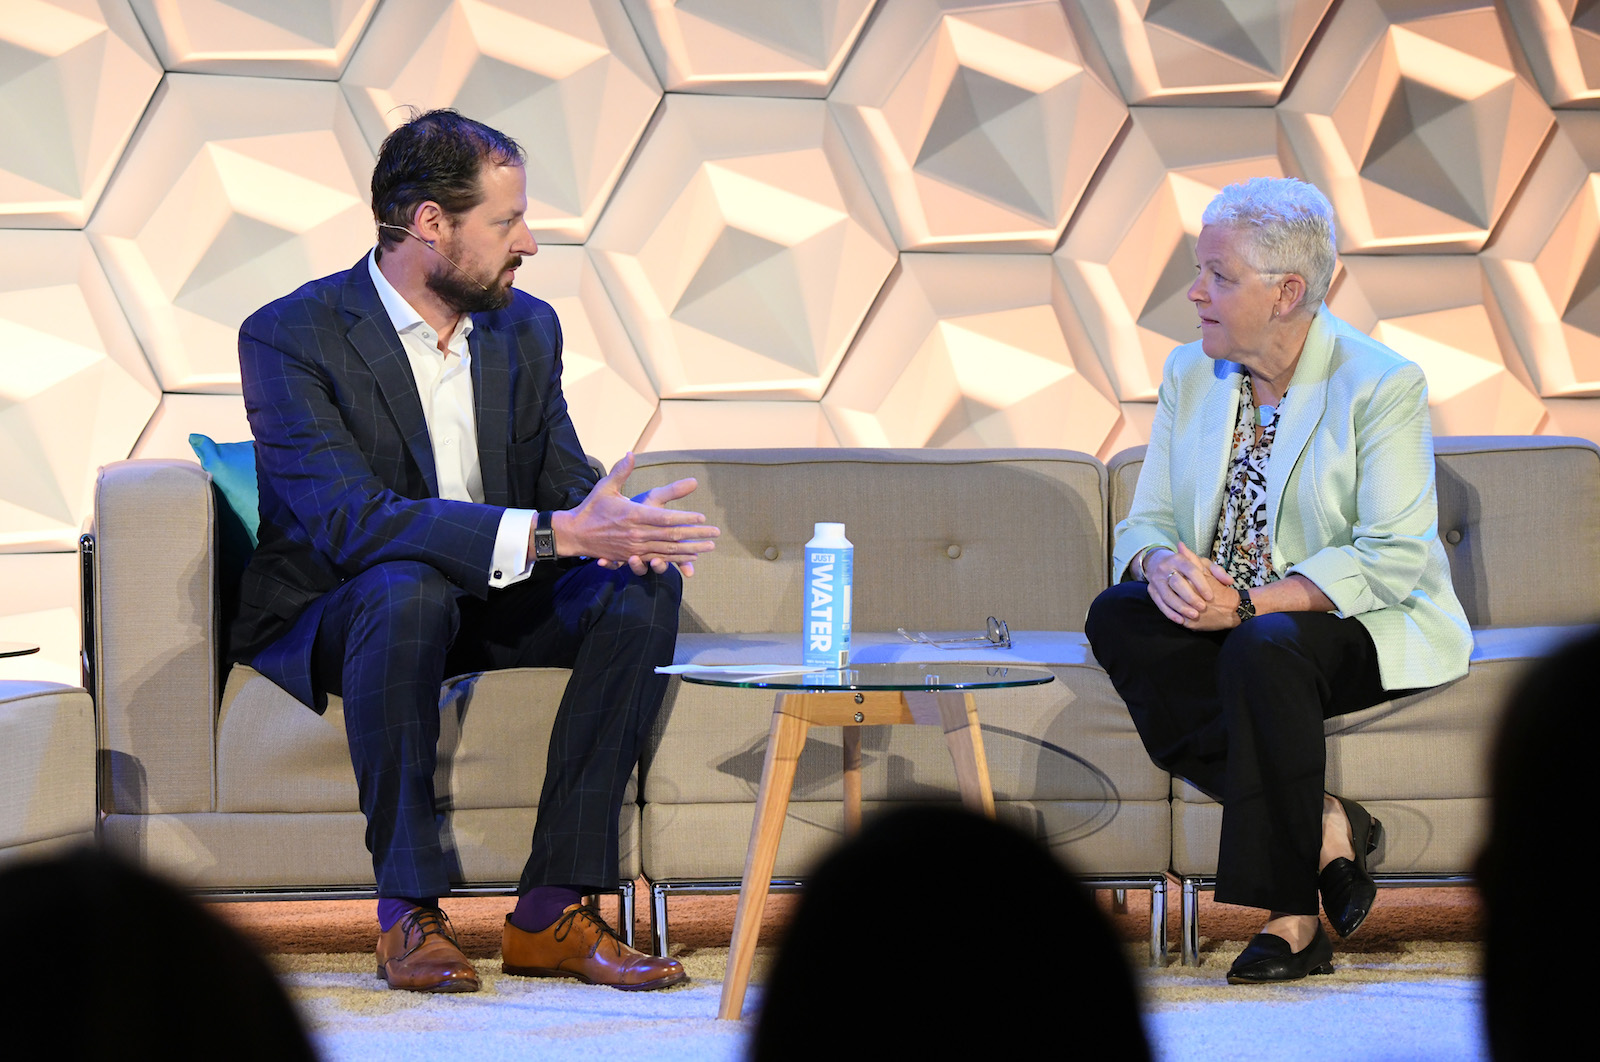 a man in a blue suit sits on a couch in conversation with a woman with short white hair. They are speaking on stage and the back of the audience's head is just visible at the bottom of the image.